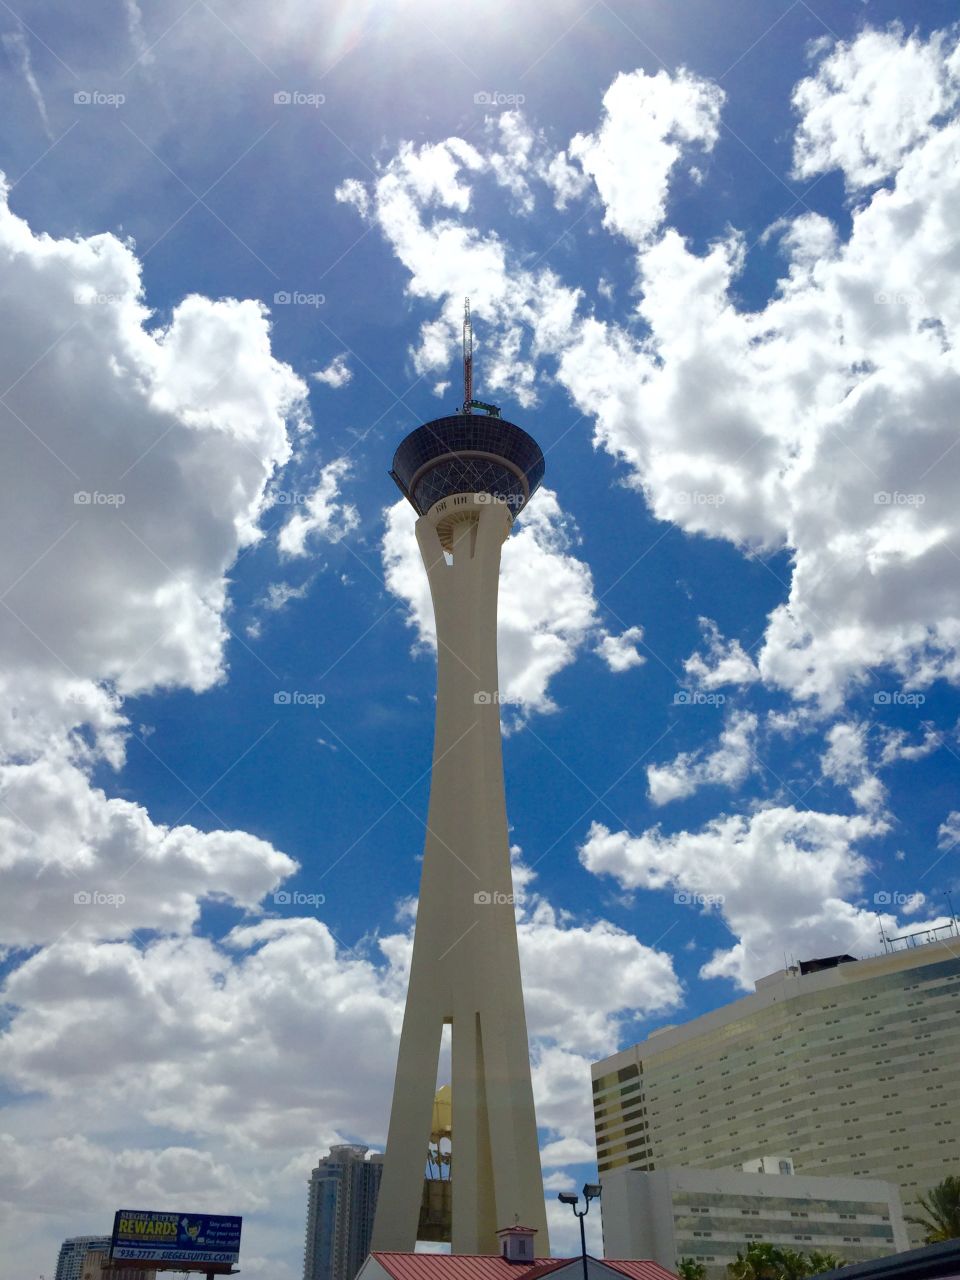 Stratosphere Tower. Amazing worms eye view of the Stratosphere tower in Las Vegas